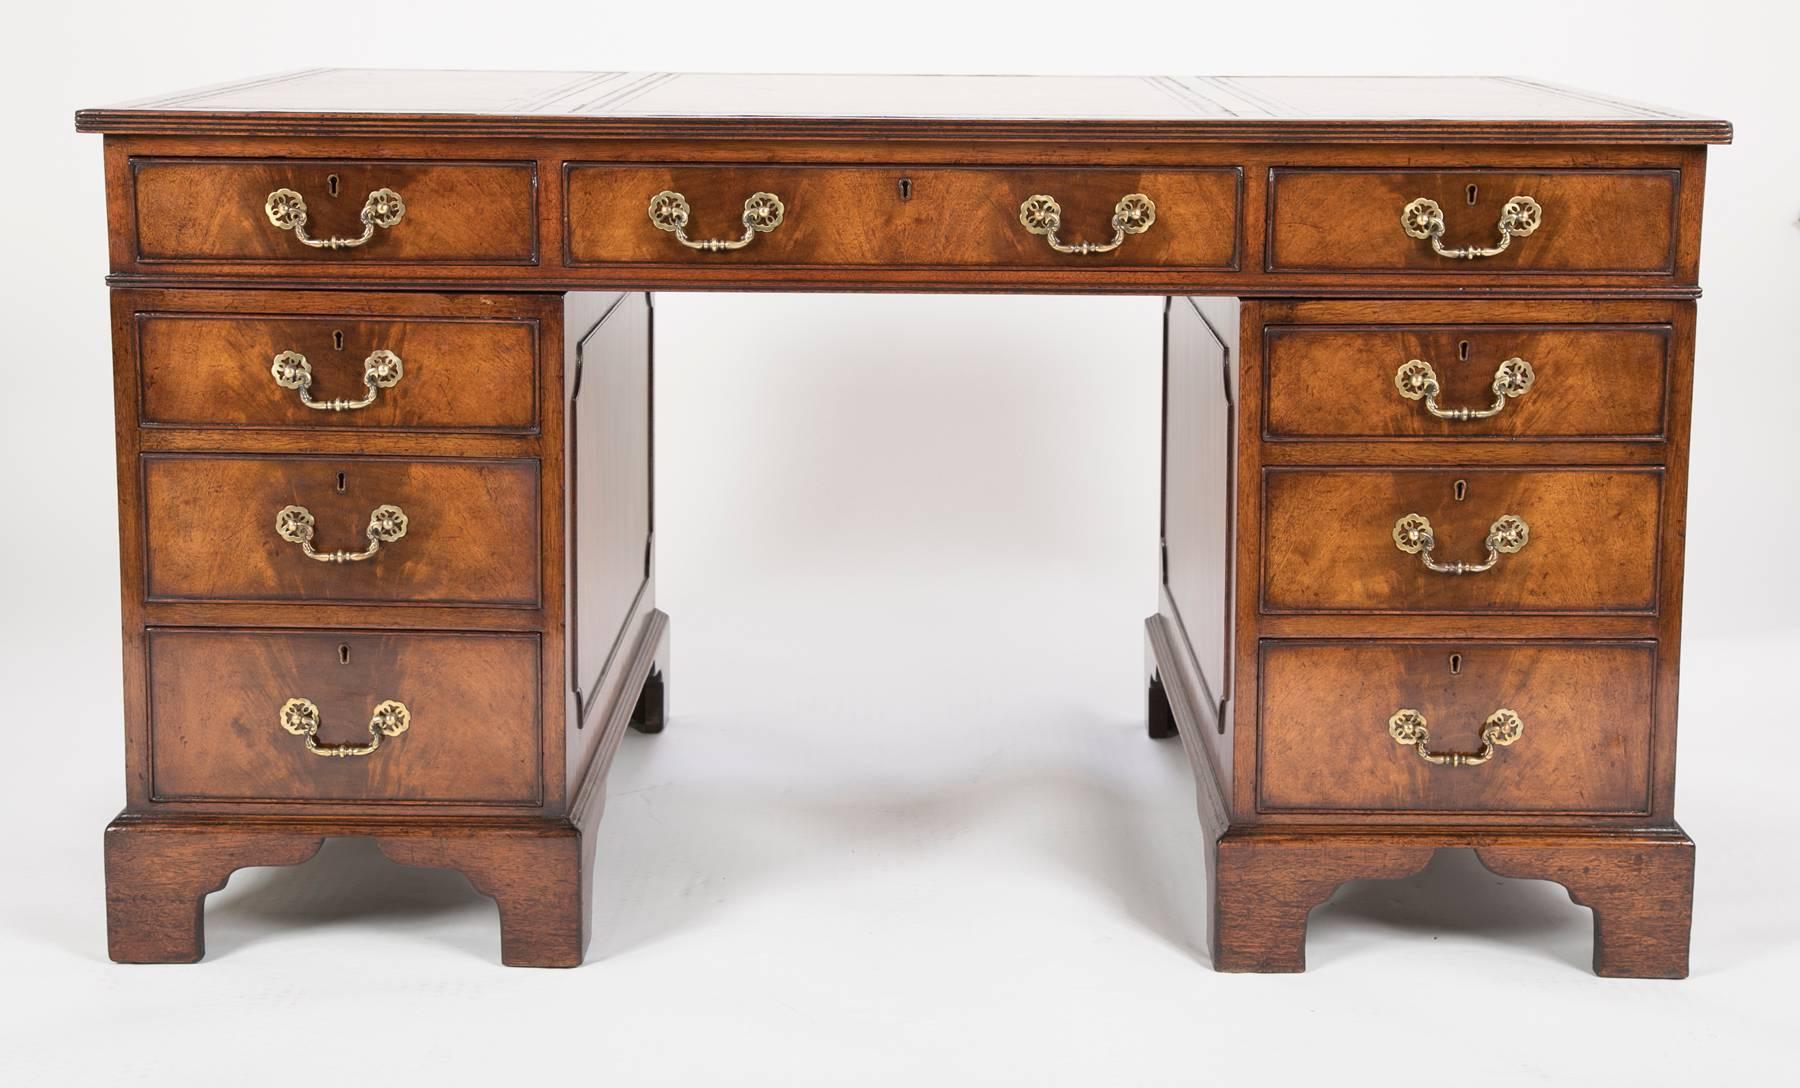 An Edwardian mahogany pedestal desk of Georgian design with leather inset top over nine flame veneer drawers with brass handles, all on bracket feet.